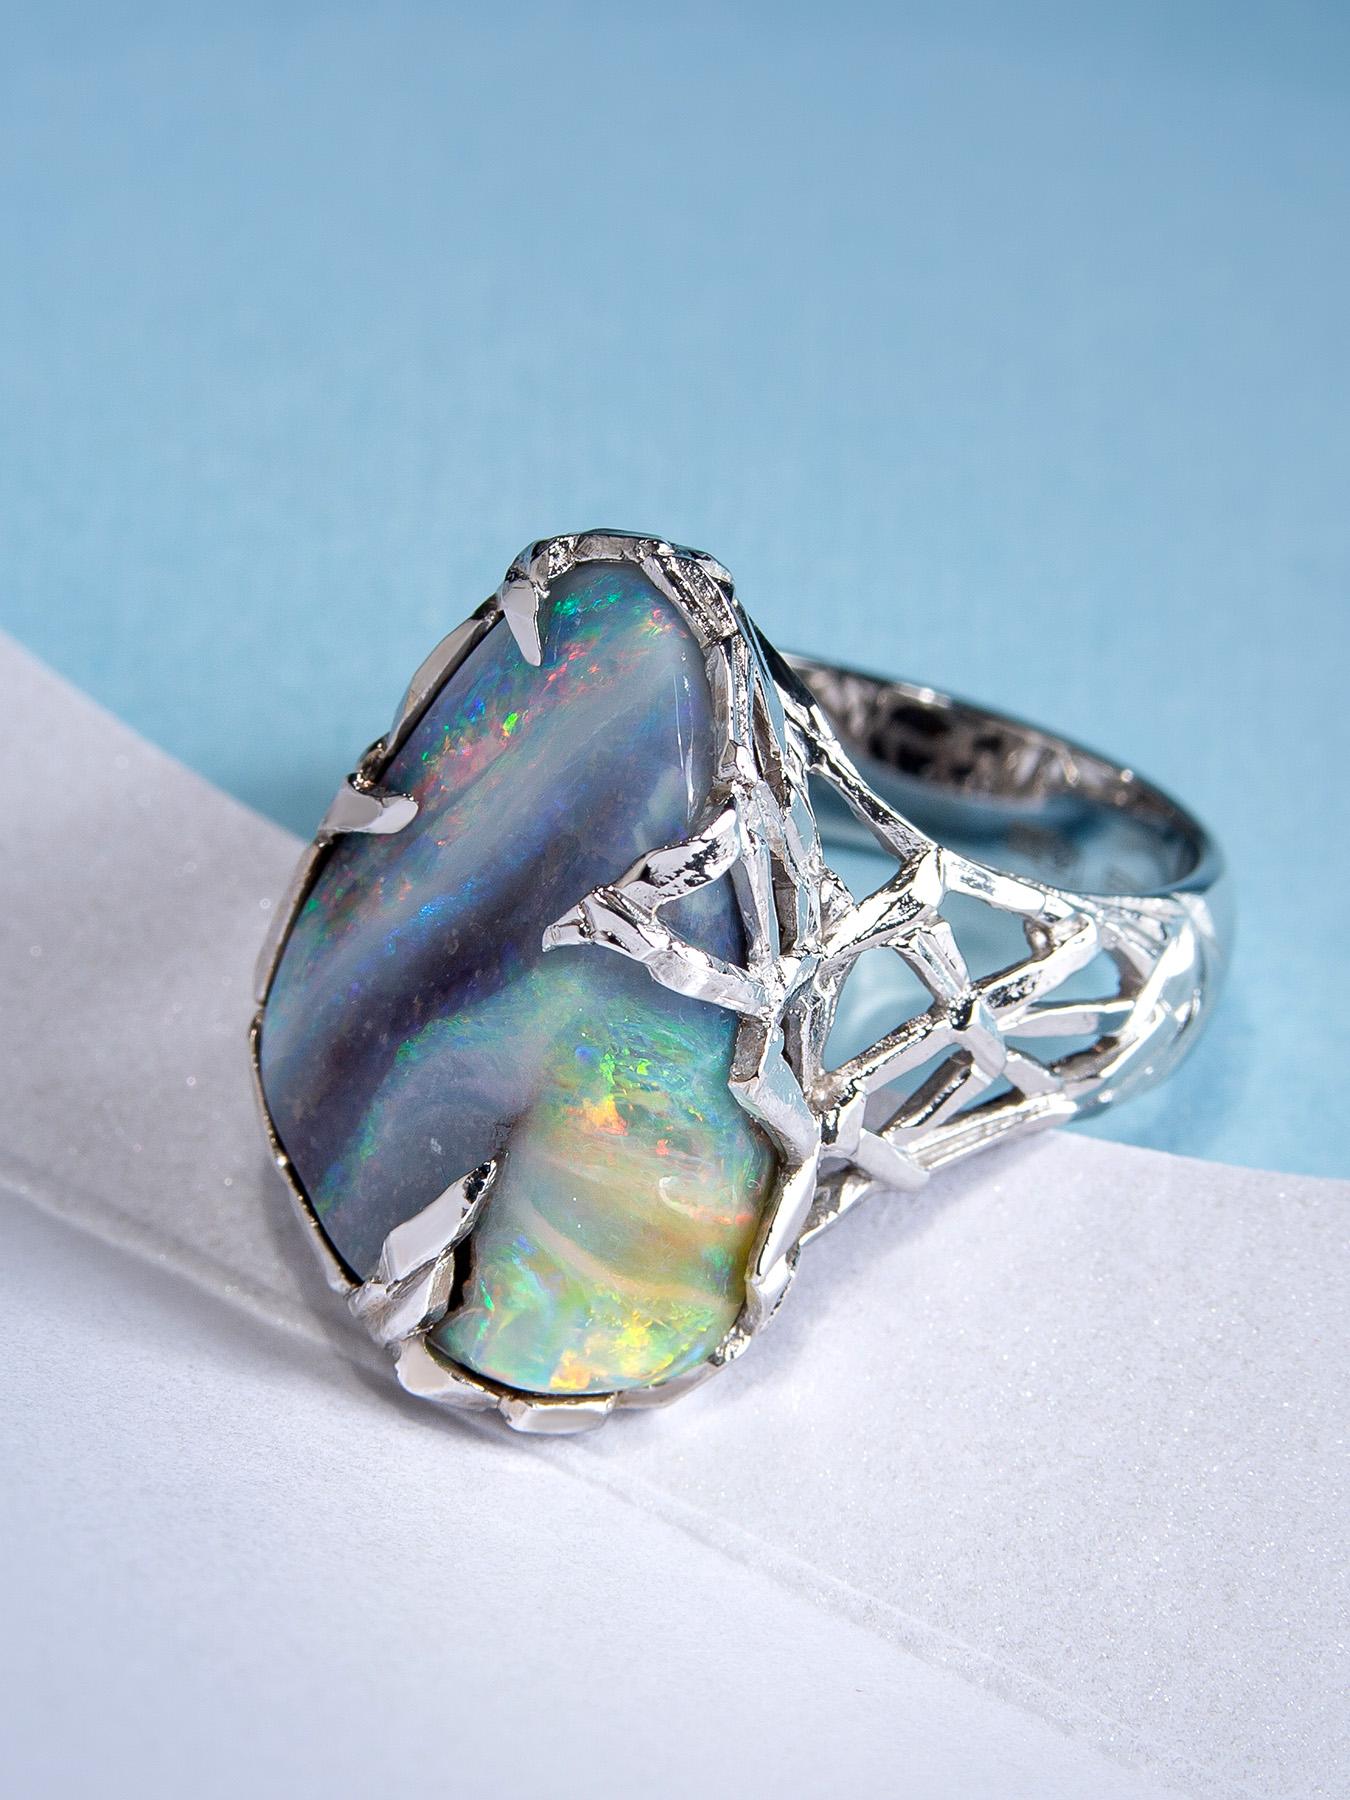 This ring has a majestic Boulder Opal in a sublime White Gold body that has a medieval structured design. Crafted with utmost precision, the Boulder Opal has a brilliantly polished surface along with its gorgeous play of color, lofty color bar, and